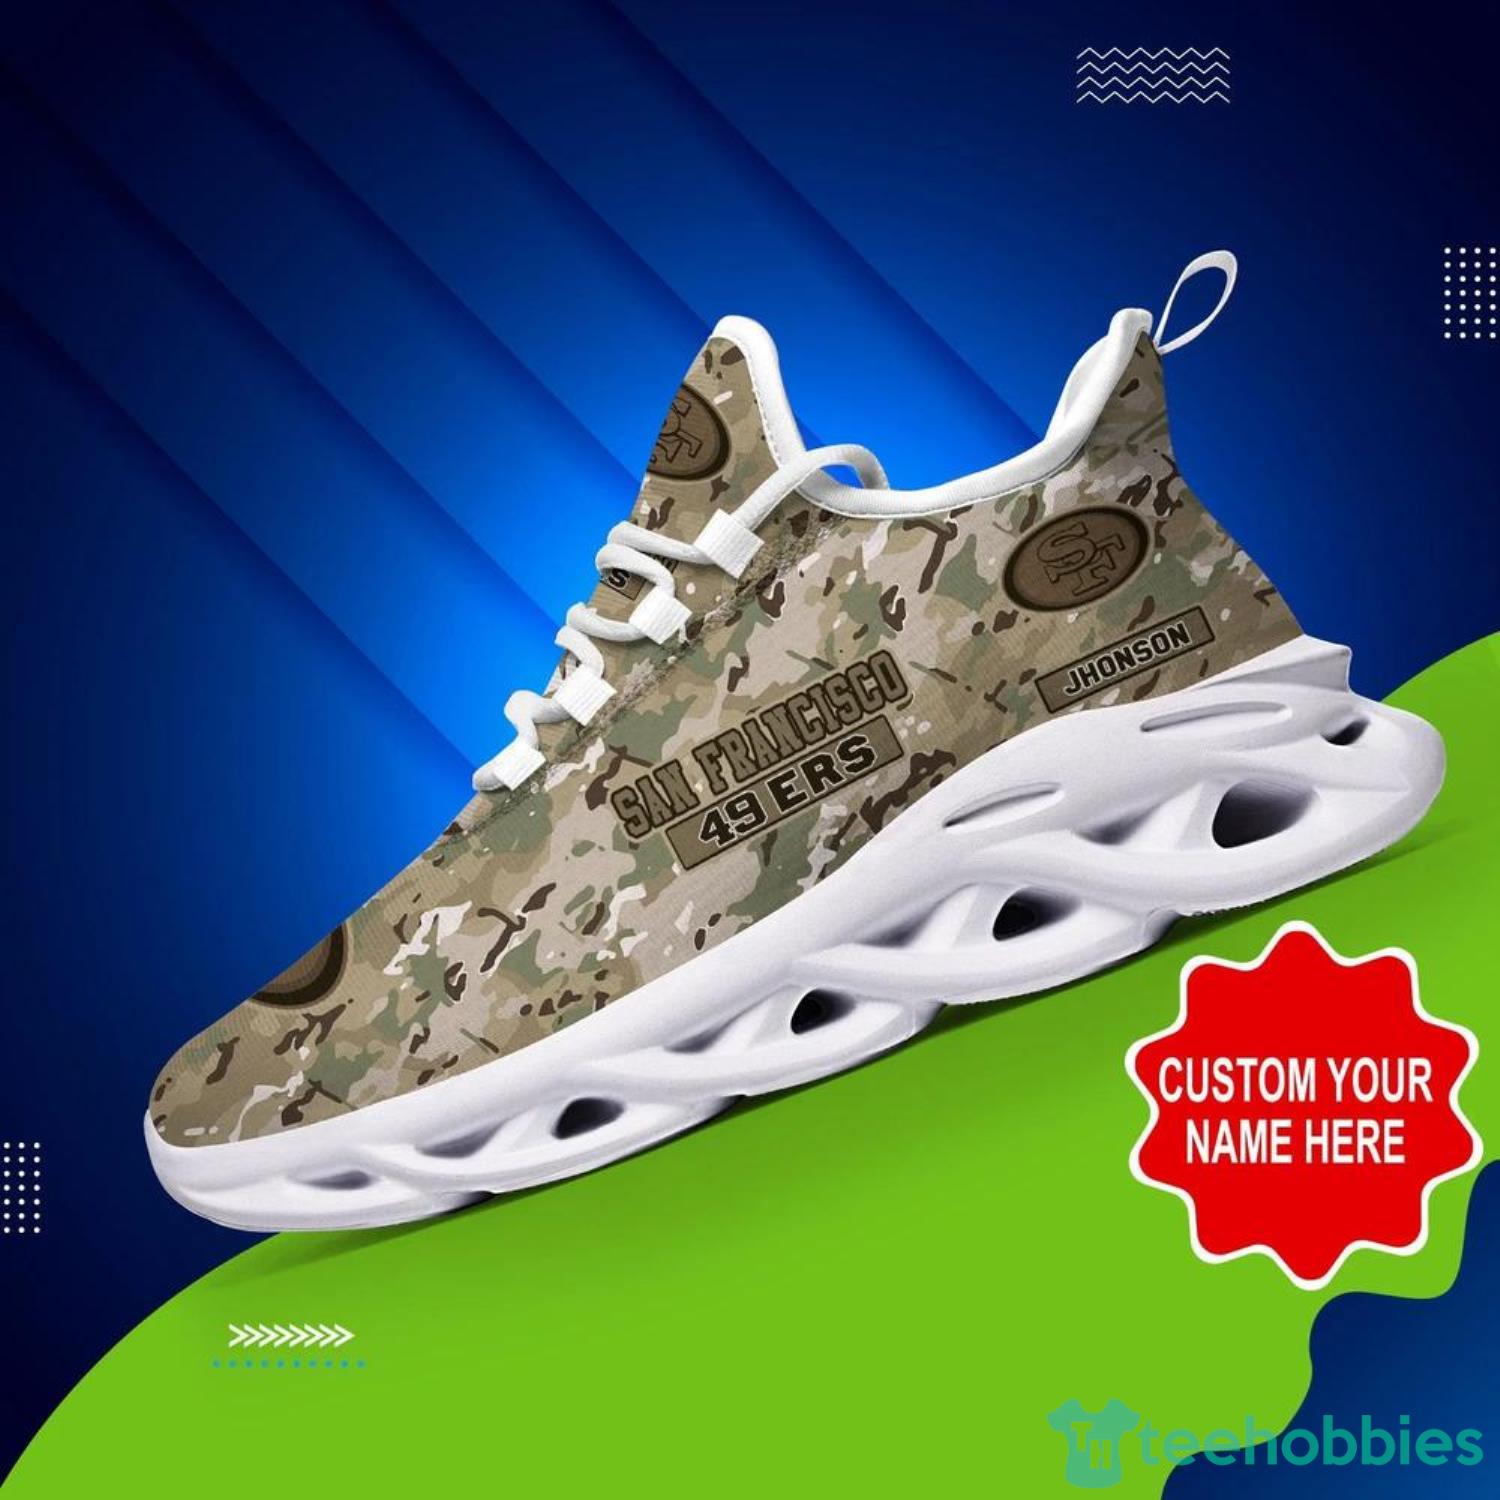 San Francisco 49Ers NFL Max Soul Shoes Custom Name Camo Pattern Sneakers - San Francisco 49Ers NFL Max Soul Shoes Custom Name, Camo Pattern Sneakers Hot Trending Personalized Gifts For NFL Fans_1